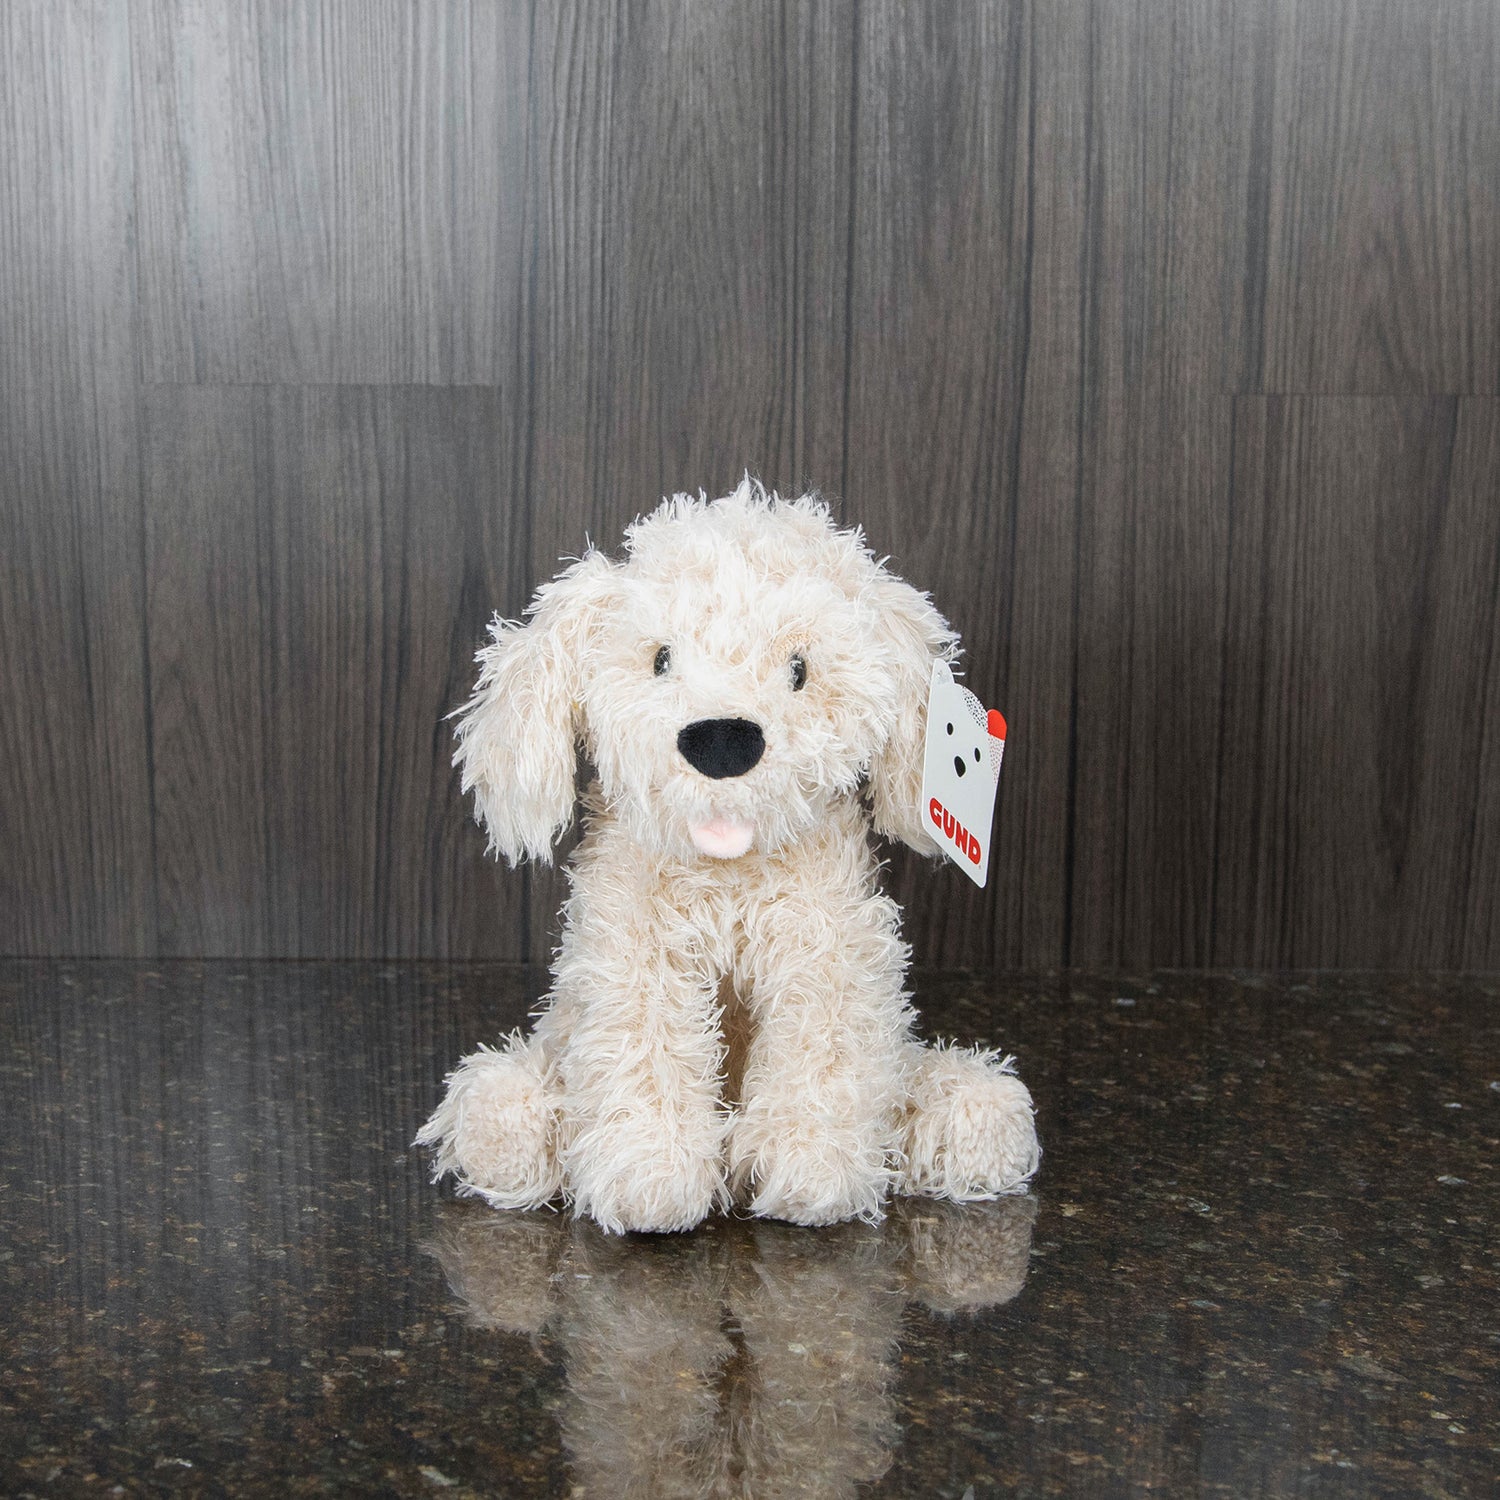 a plush dog with blonde curly fur